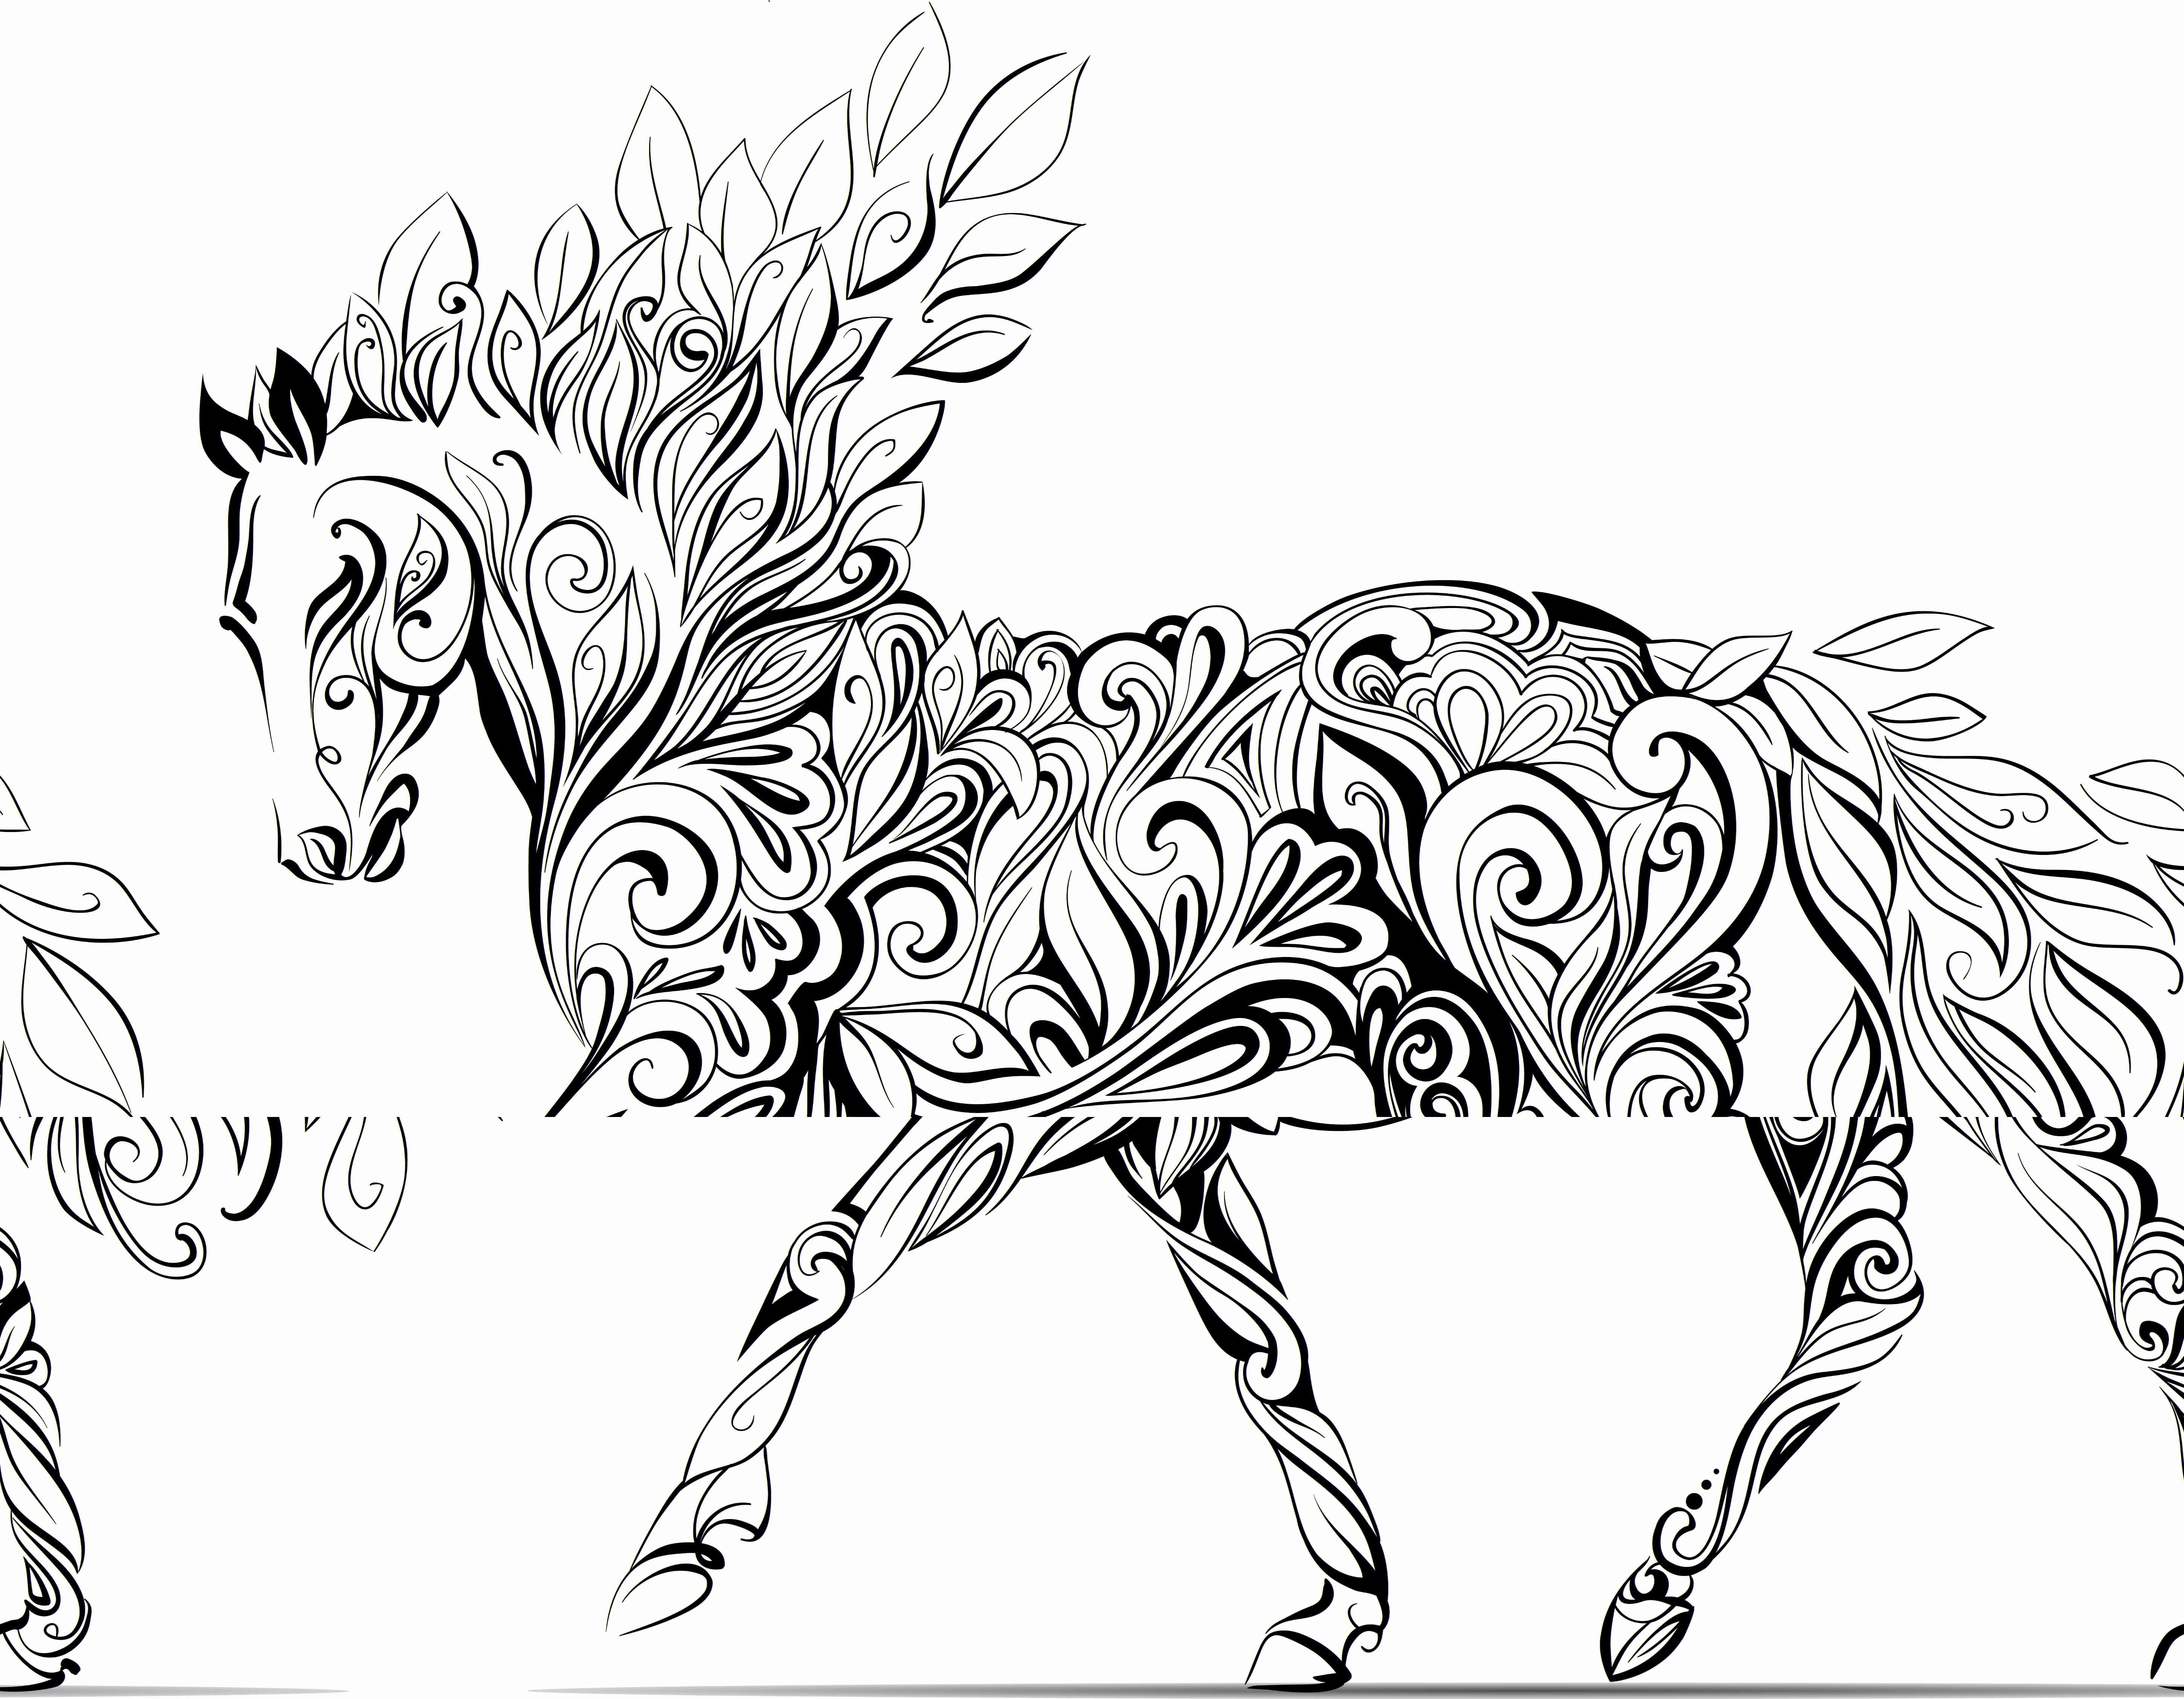 Unicorn Pictures to Colour In